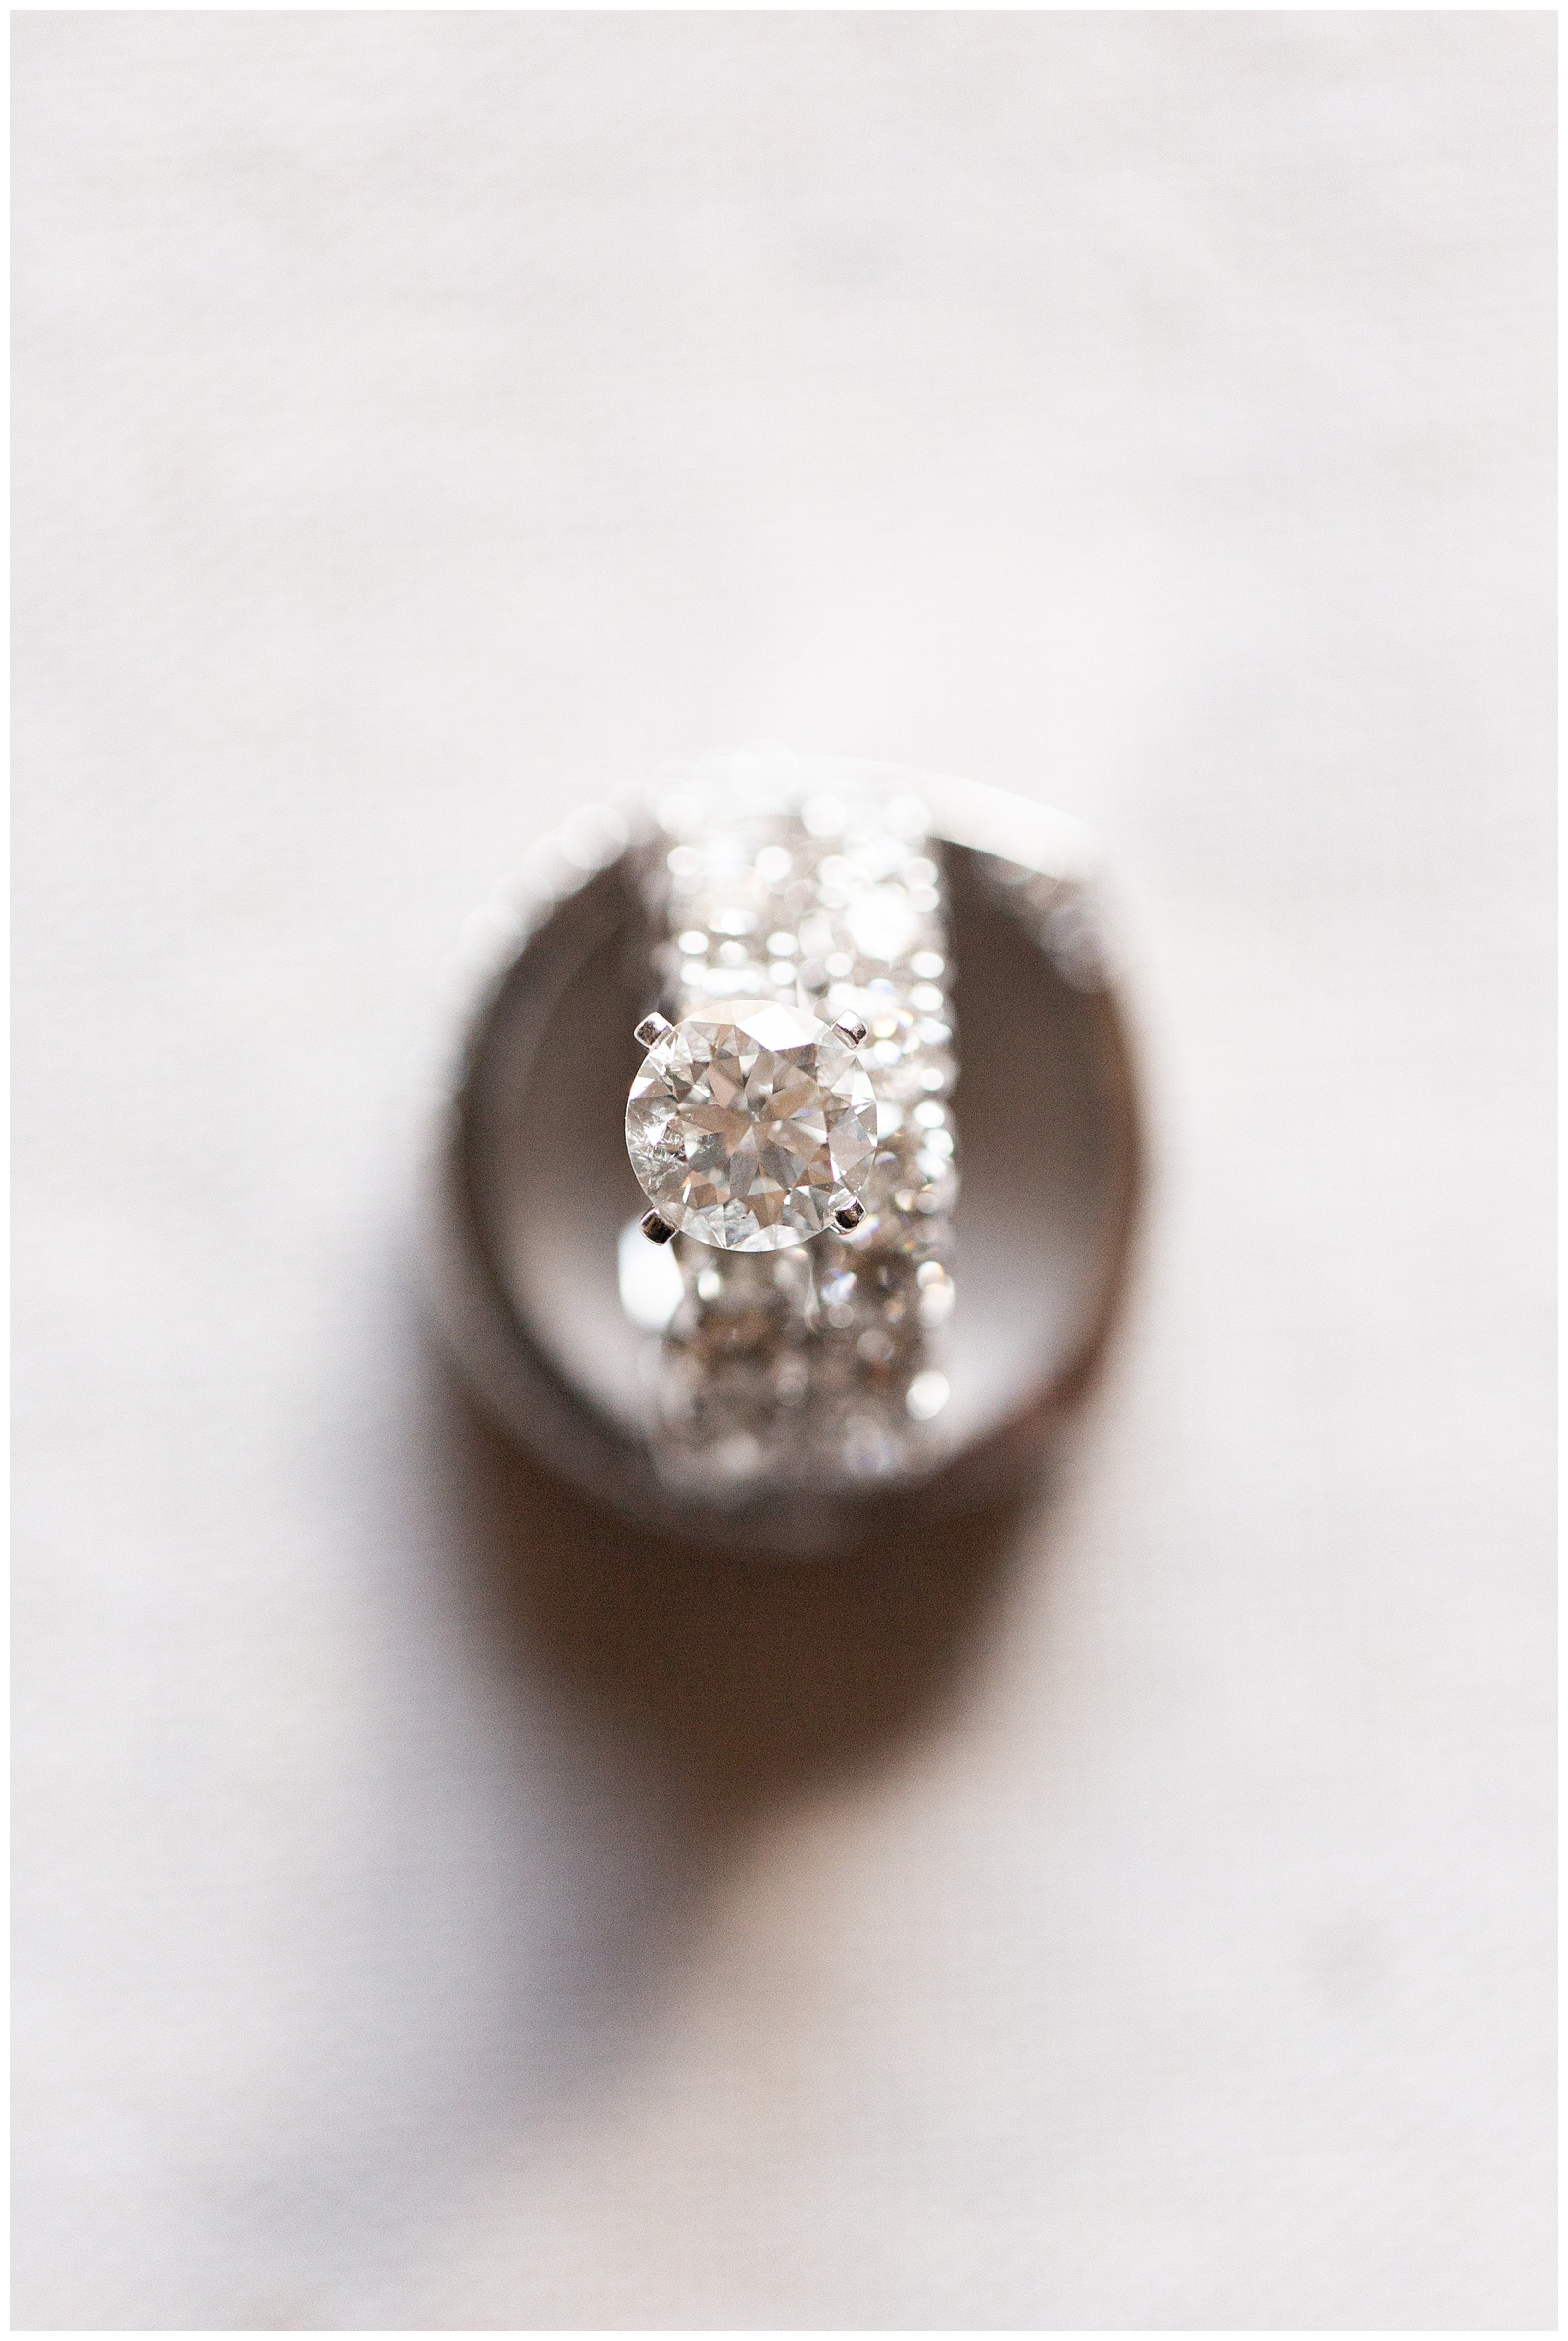 Wedding ring by riane roberts photography